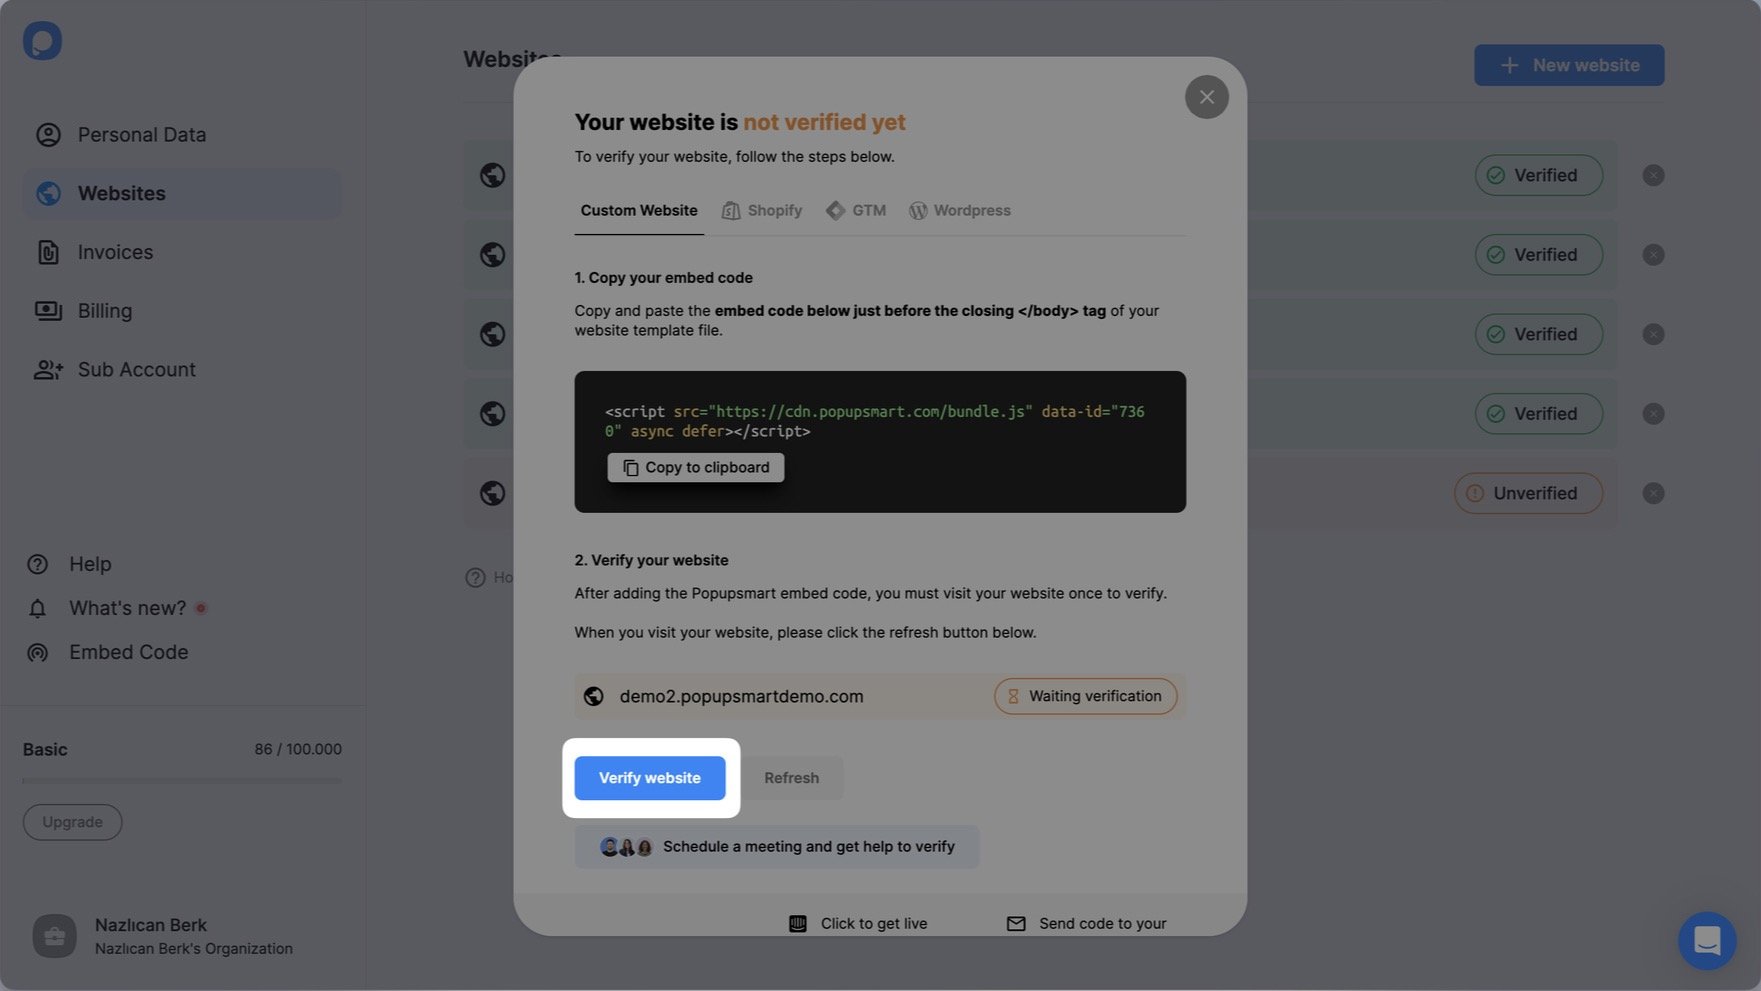 Popupsmart's embed code modal showing "Verify website" button highlighted